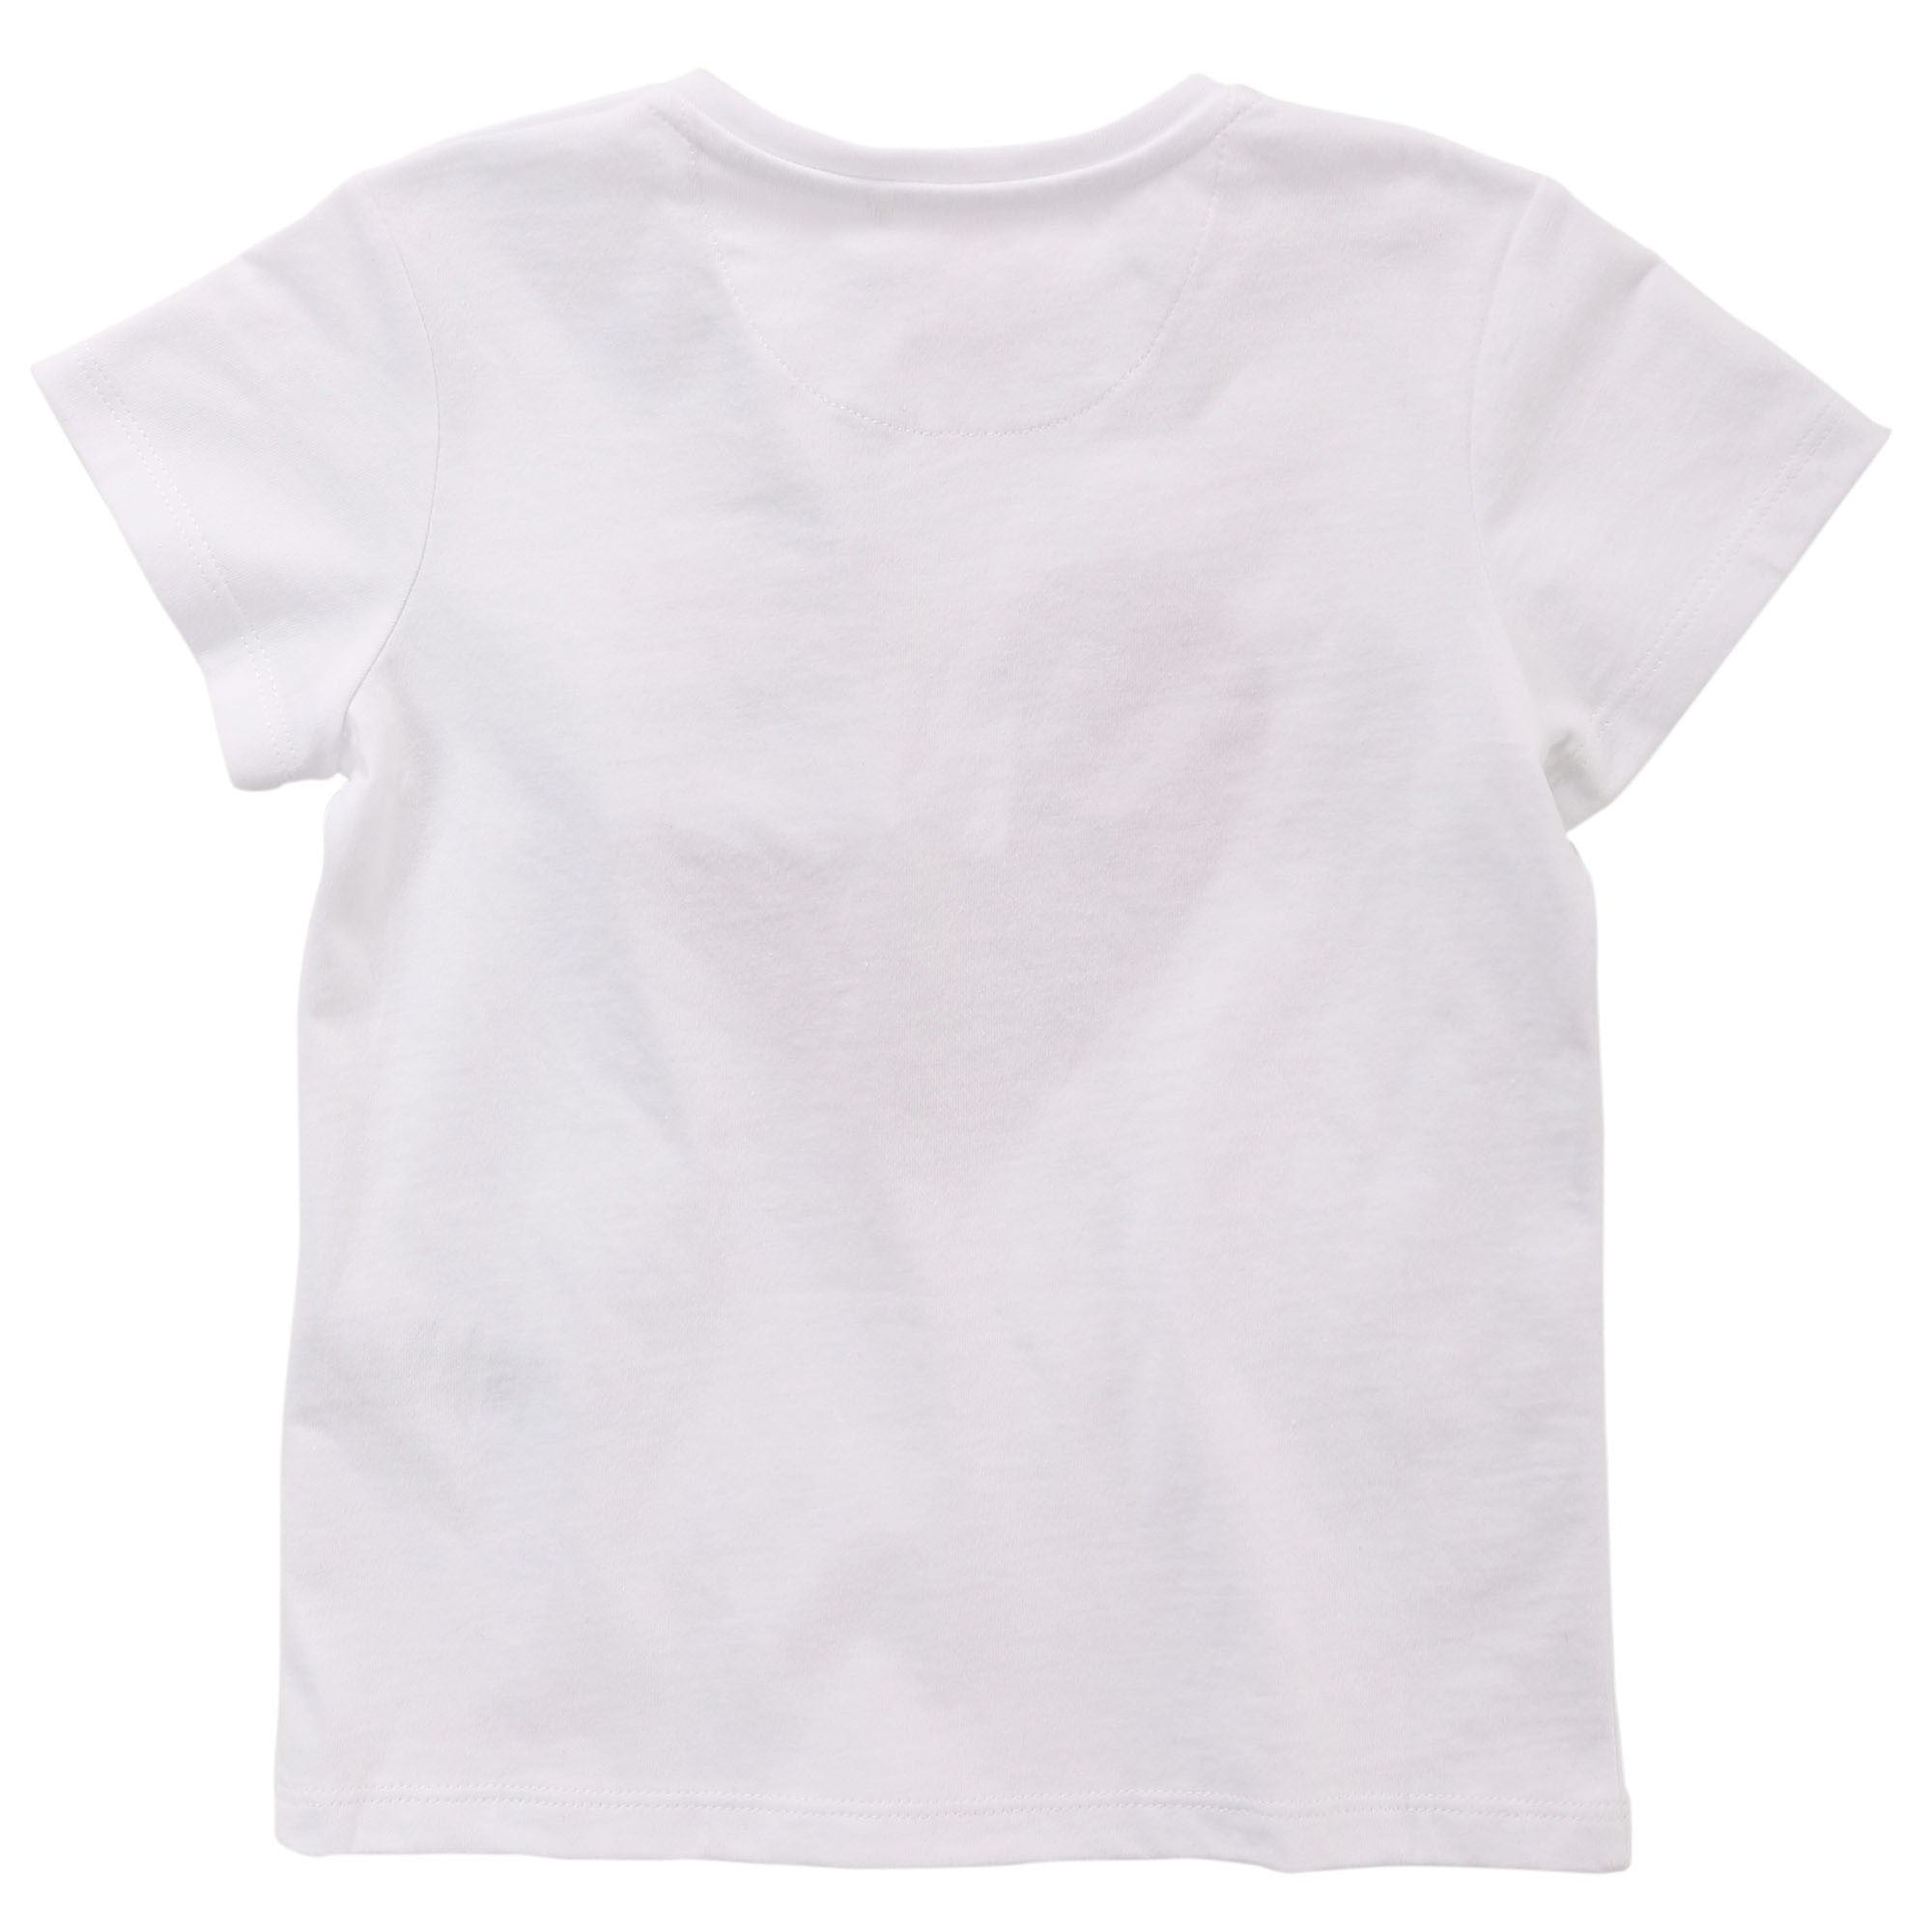 Baby Girls White Cotton T-Shirt With Red Heart Trims - CÉMAROSE | Children's Fashion Store - 2